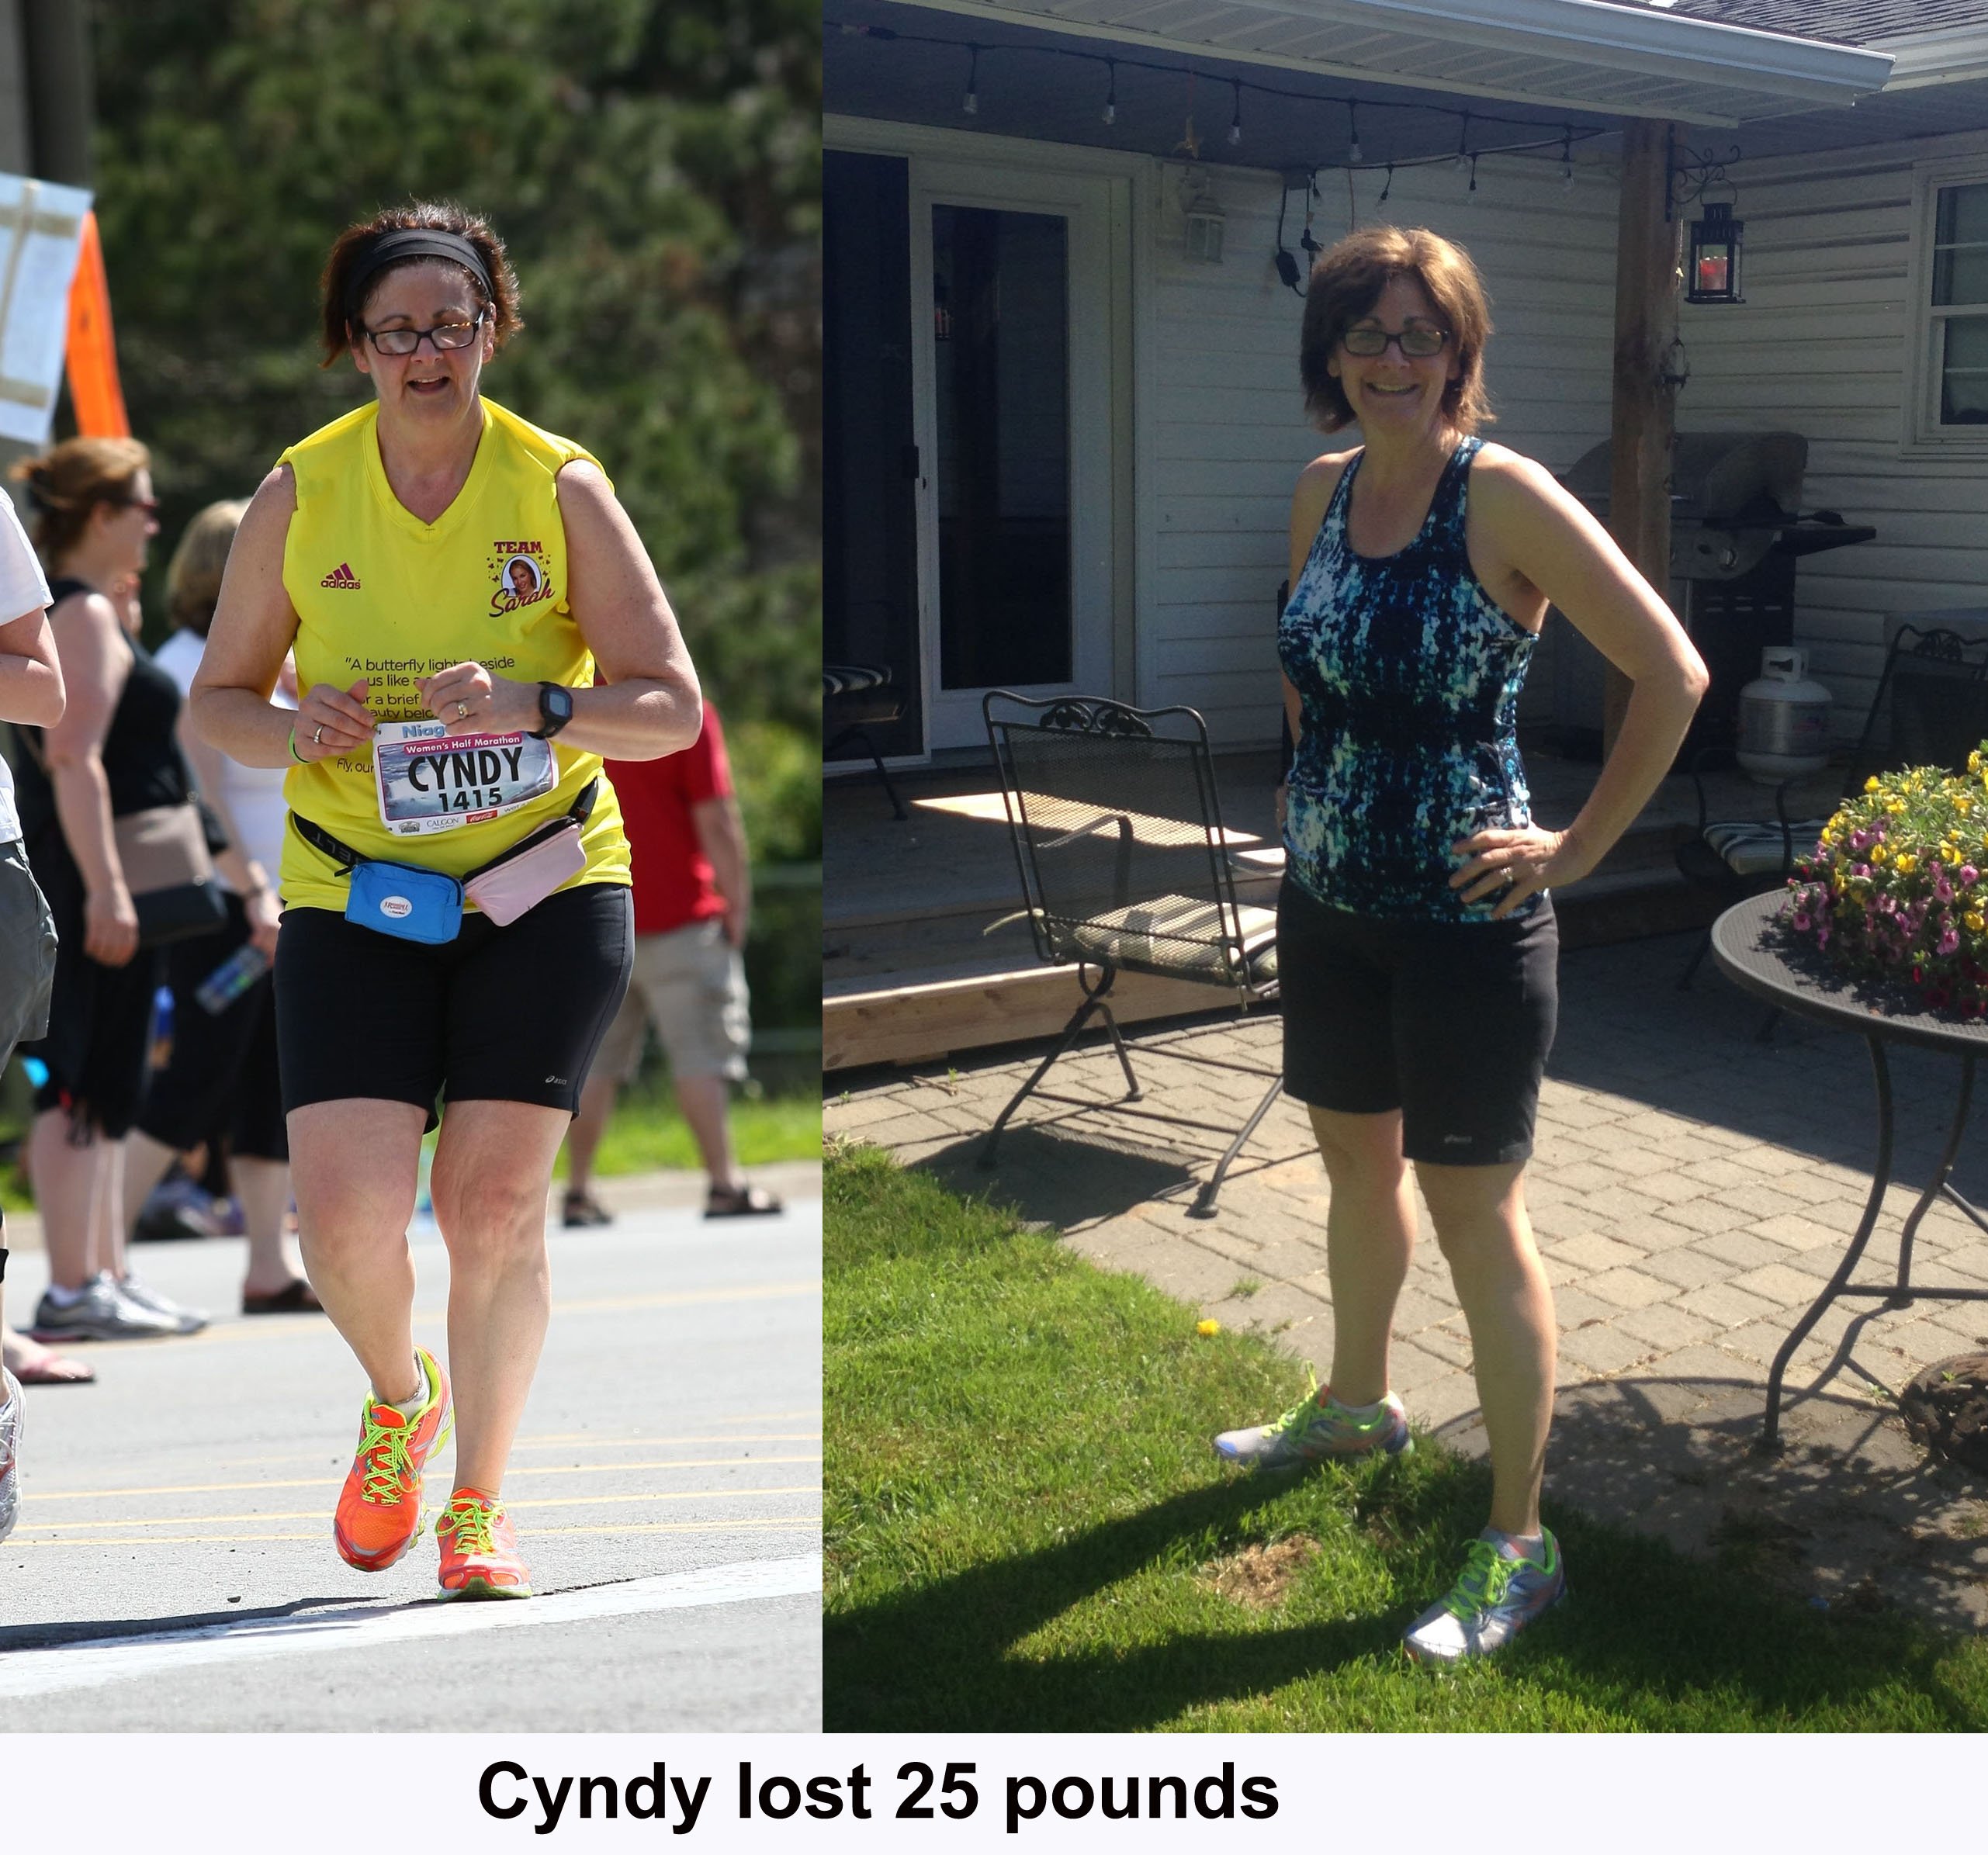 pic of Cyndy who lost 25 pounds